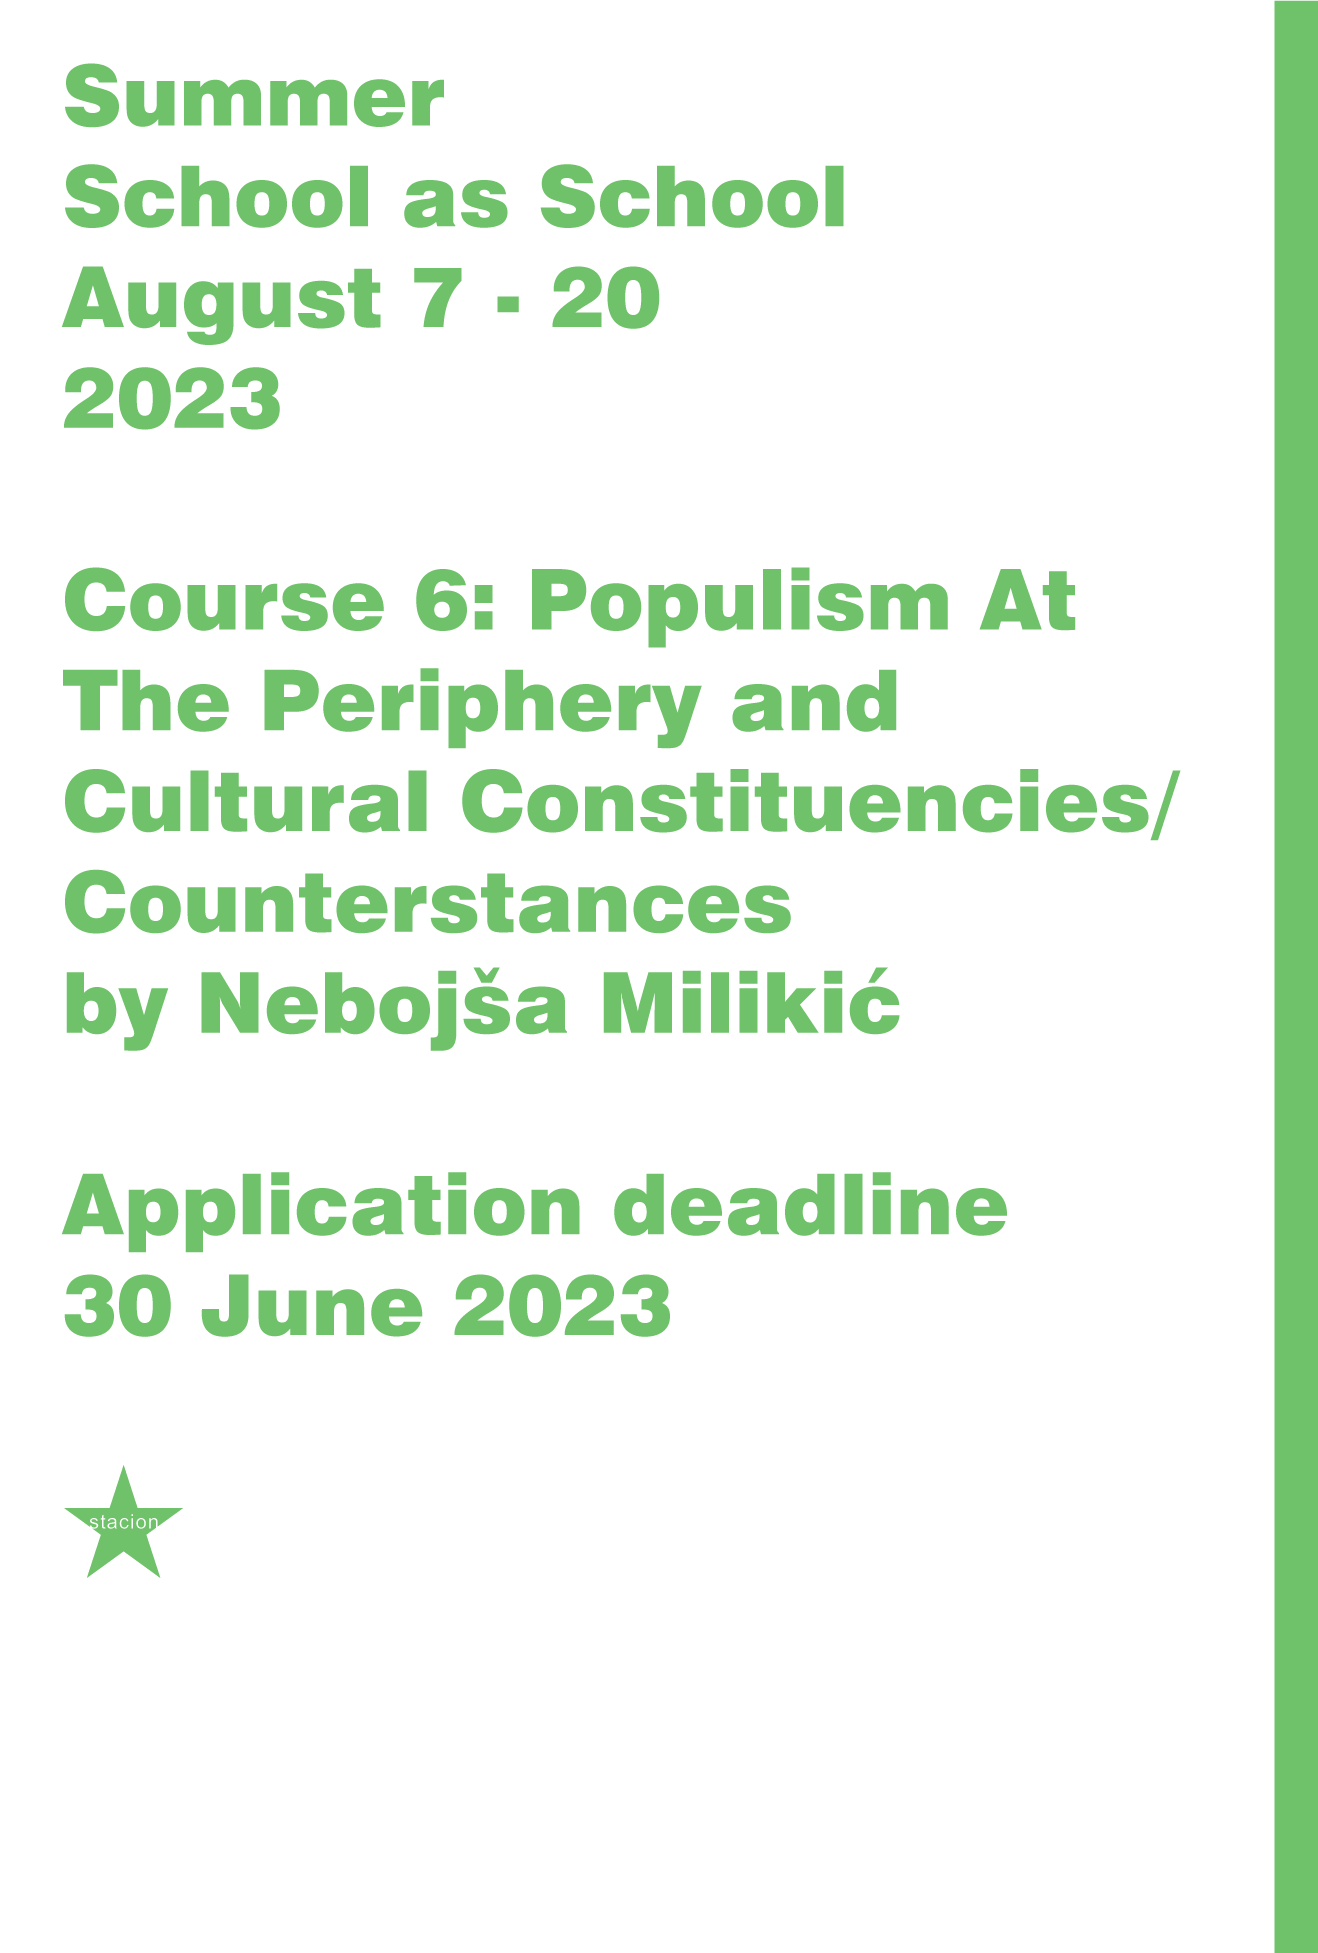 Course 6: Populism At The Periphery And Cultural Constituencies/Counterstances